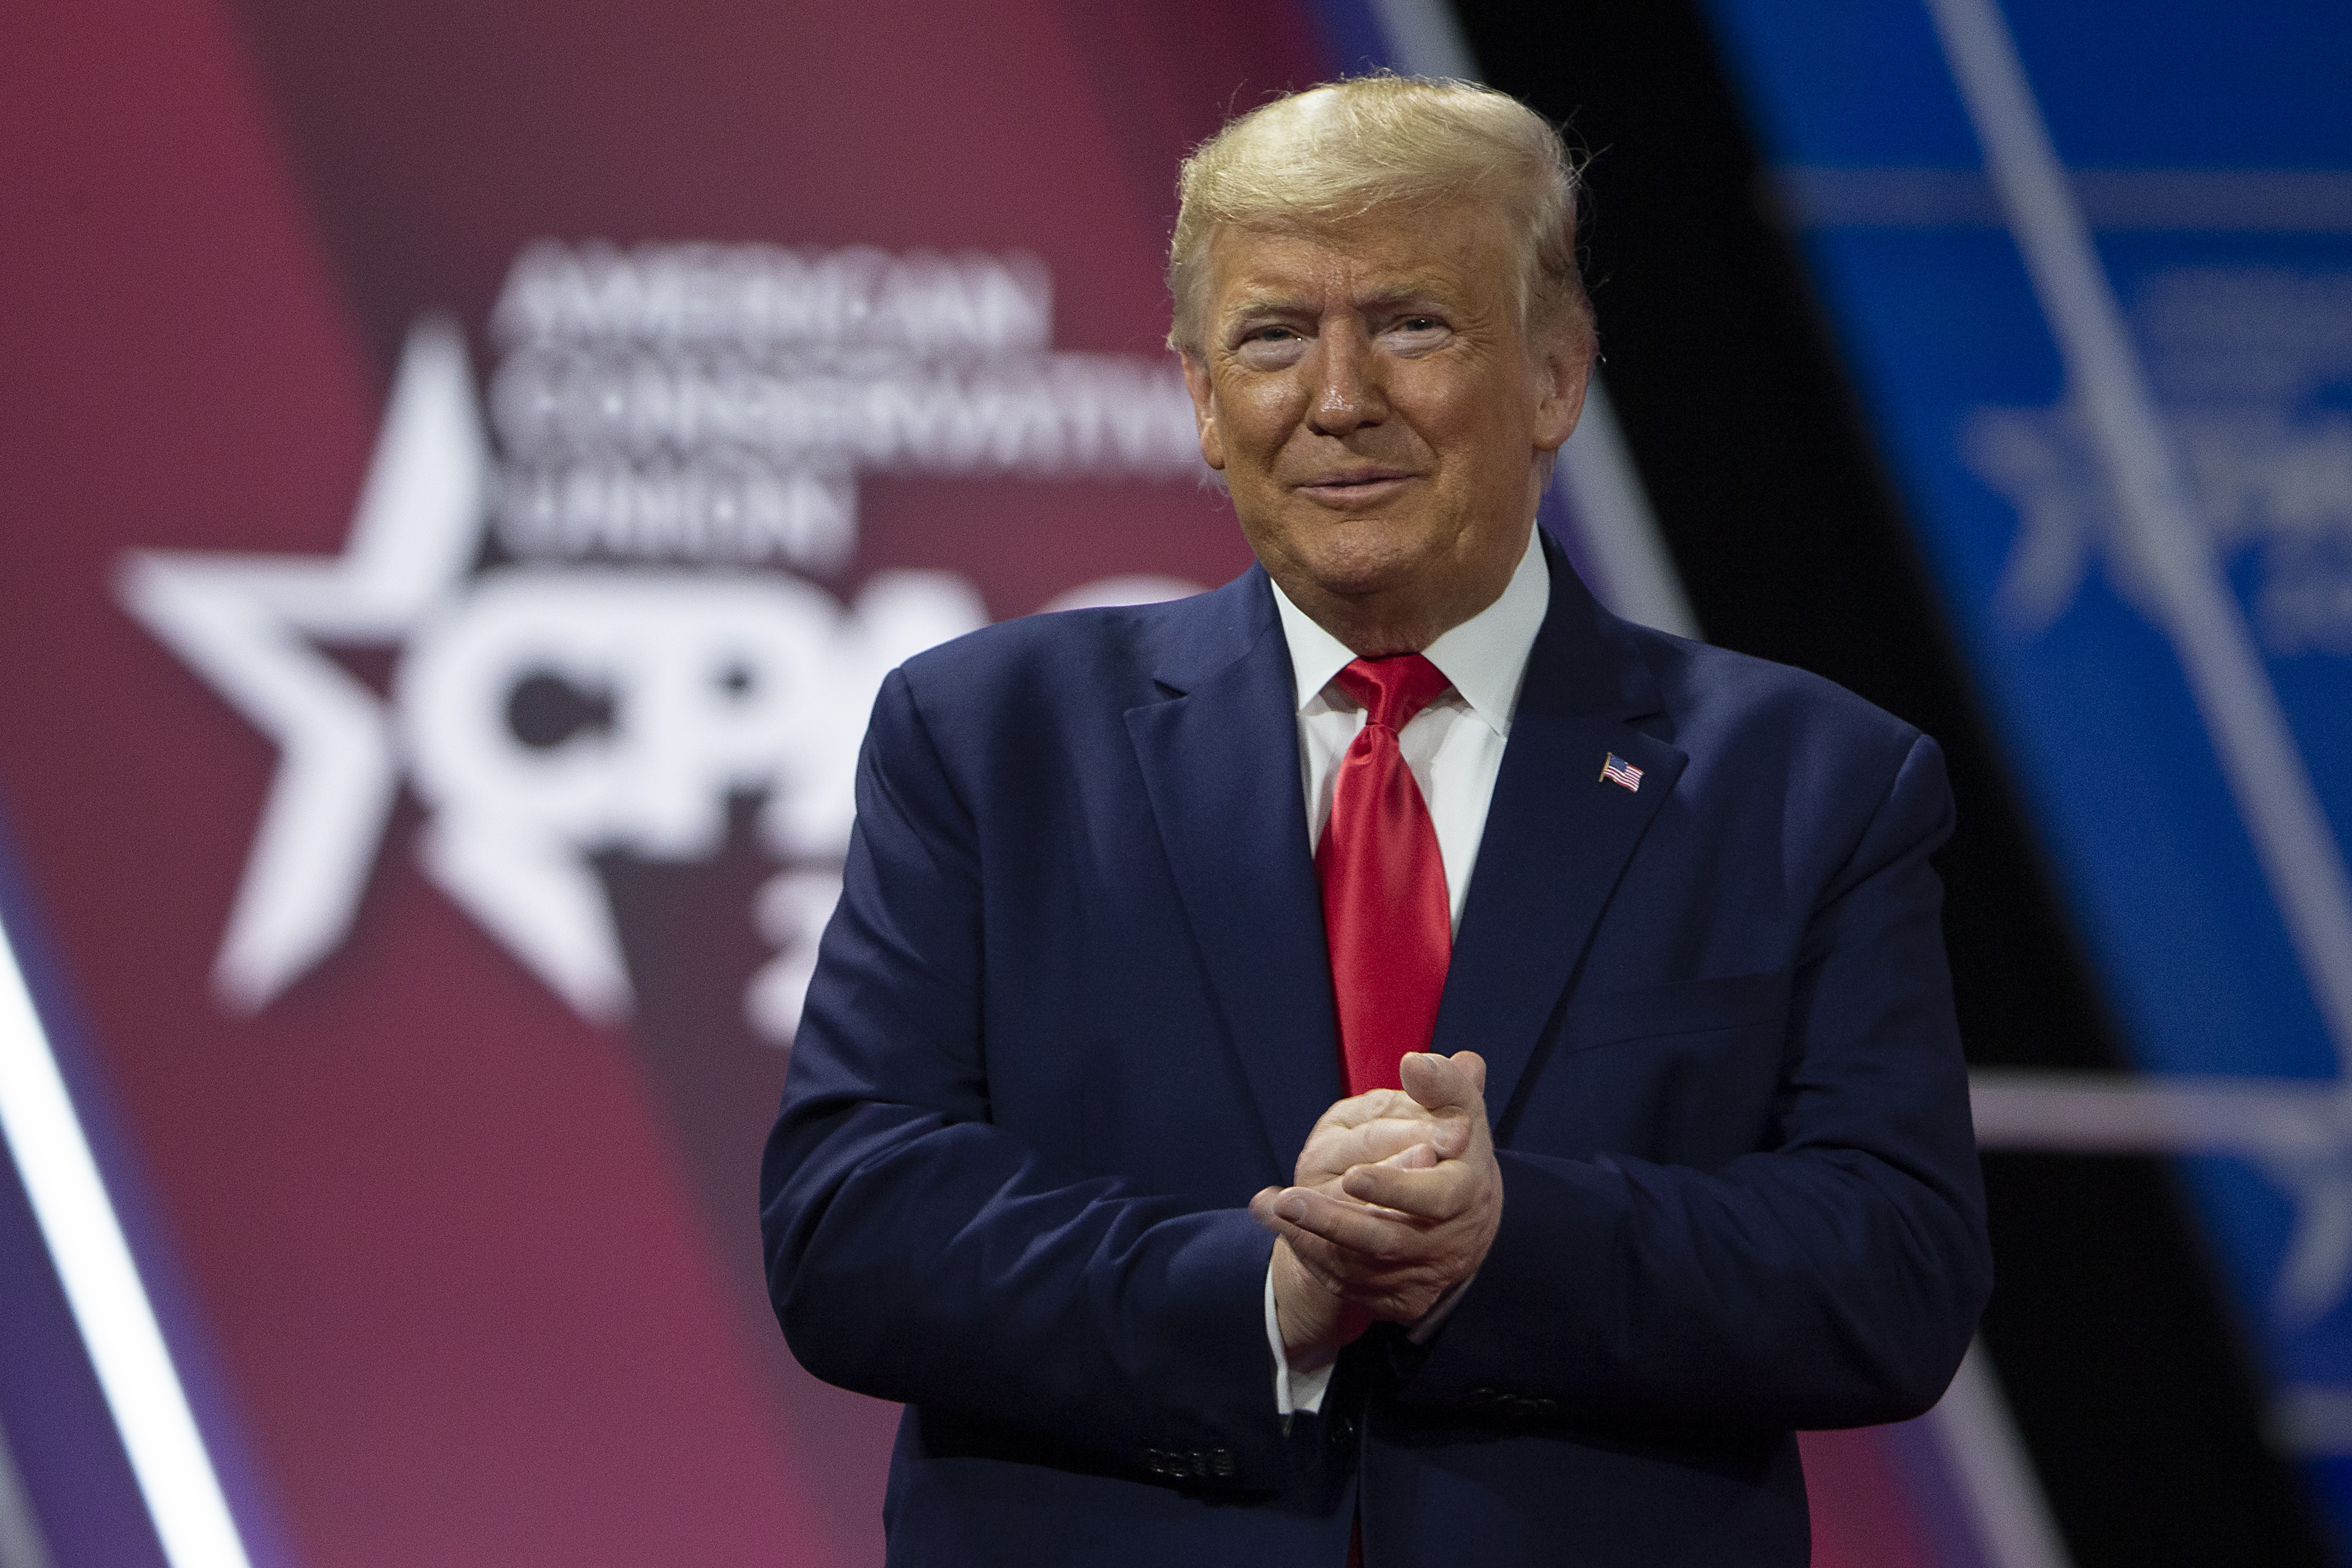 NATIONAL HARBOR, MARYLAND - FEBRUARY 29: President Donald Trump acknowledges the crowd during the annual Conservative Political Action Conference (CPAC) at Gaylord National Resort & Convention Center February 29, 2020 in National Harbor, Maryland. Conservatives gather at the annual event to discuss their agenda. (Photo by Tasos Katopodis/Getty Images)